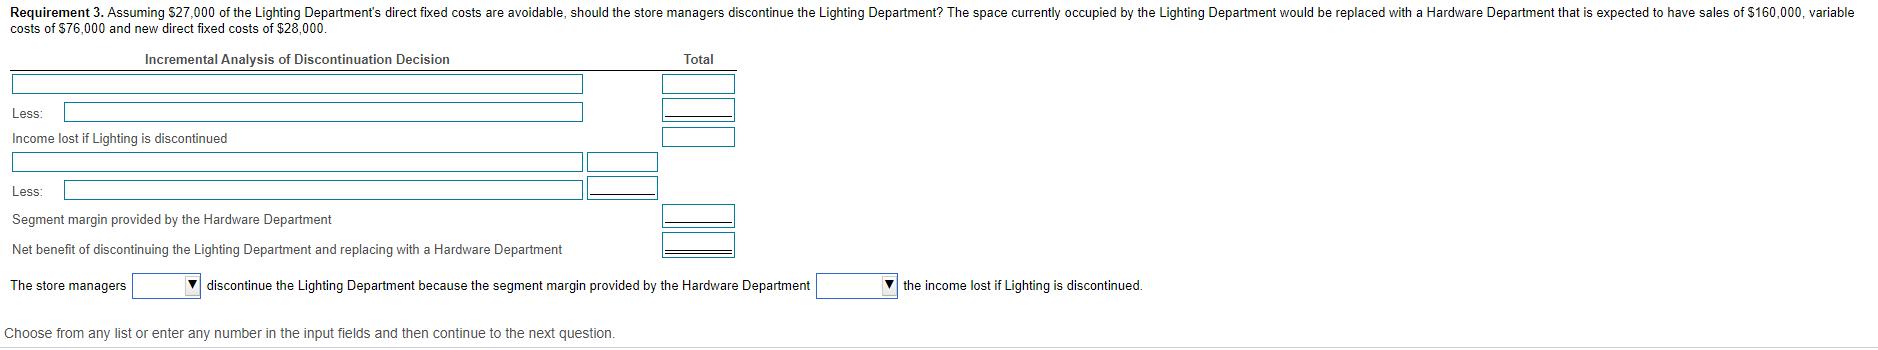 Requirement 3. Assuming $27,000 of the Lighting Departments direct fixed costs are avoidable, should the store managers disc